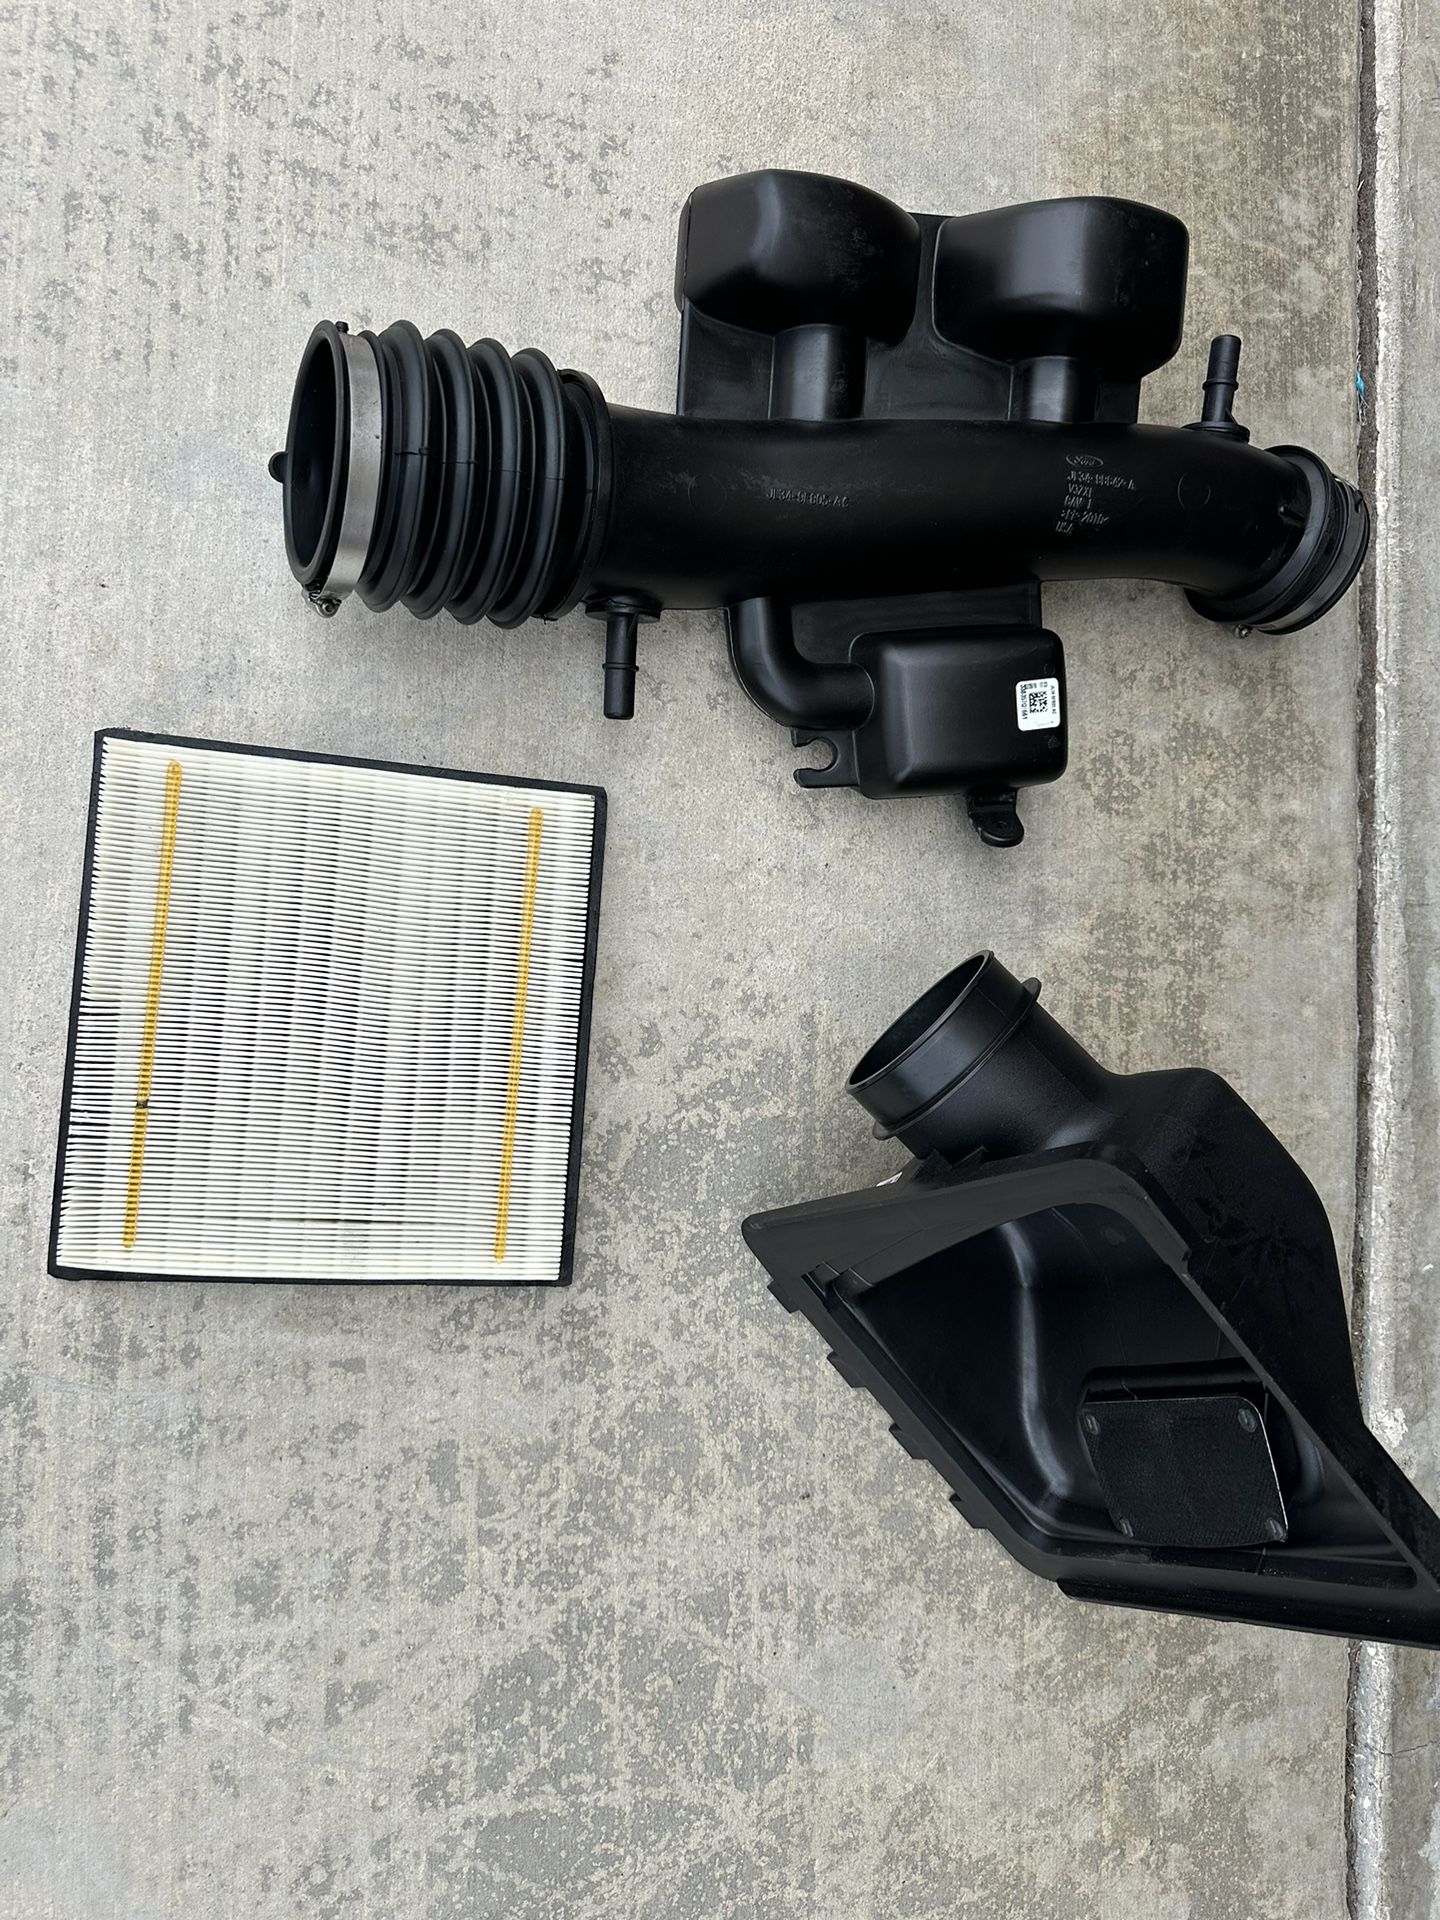 2018 Ford Truck Original Air Intake with New Air Filter